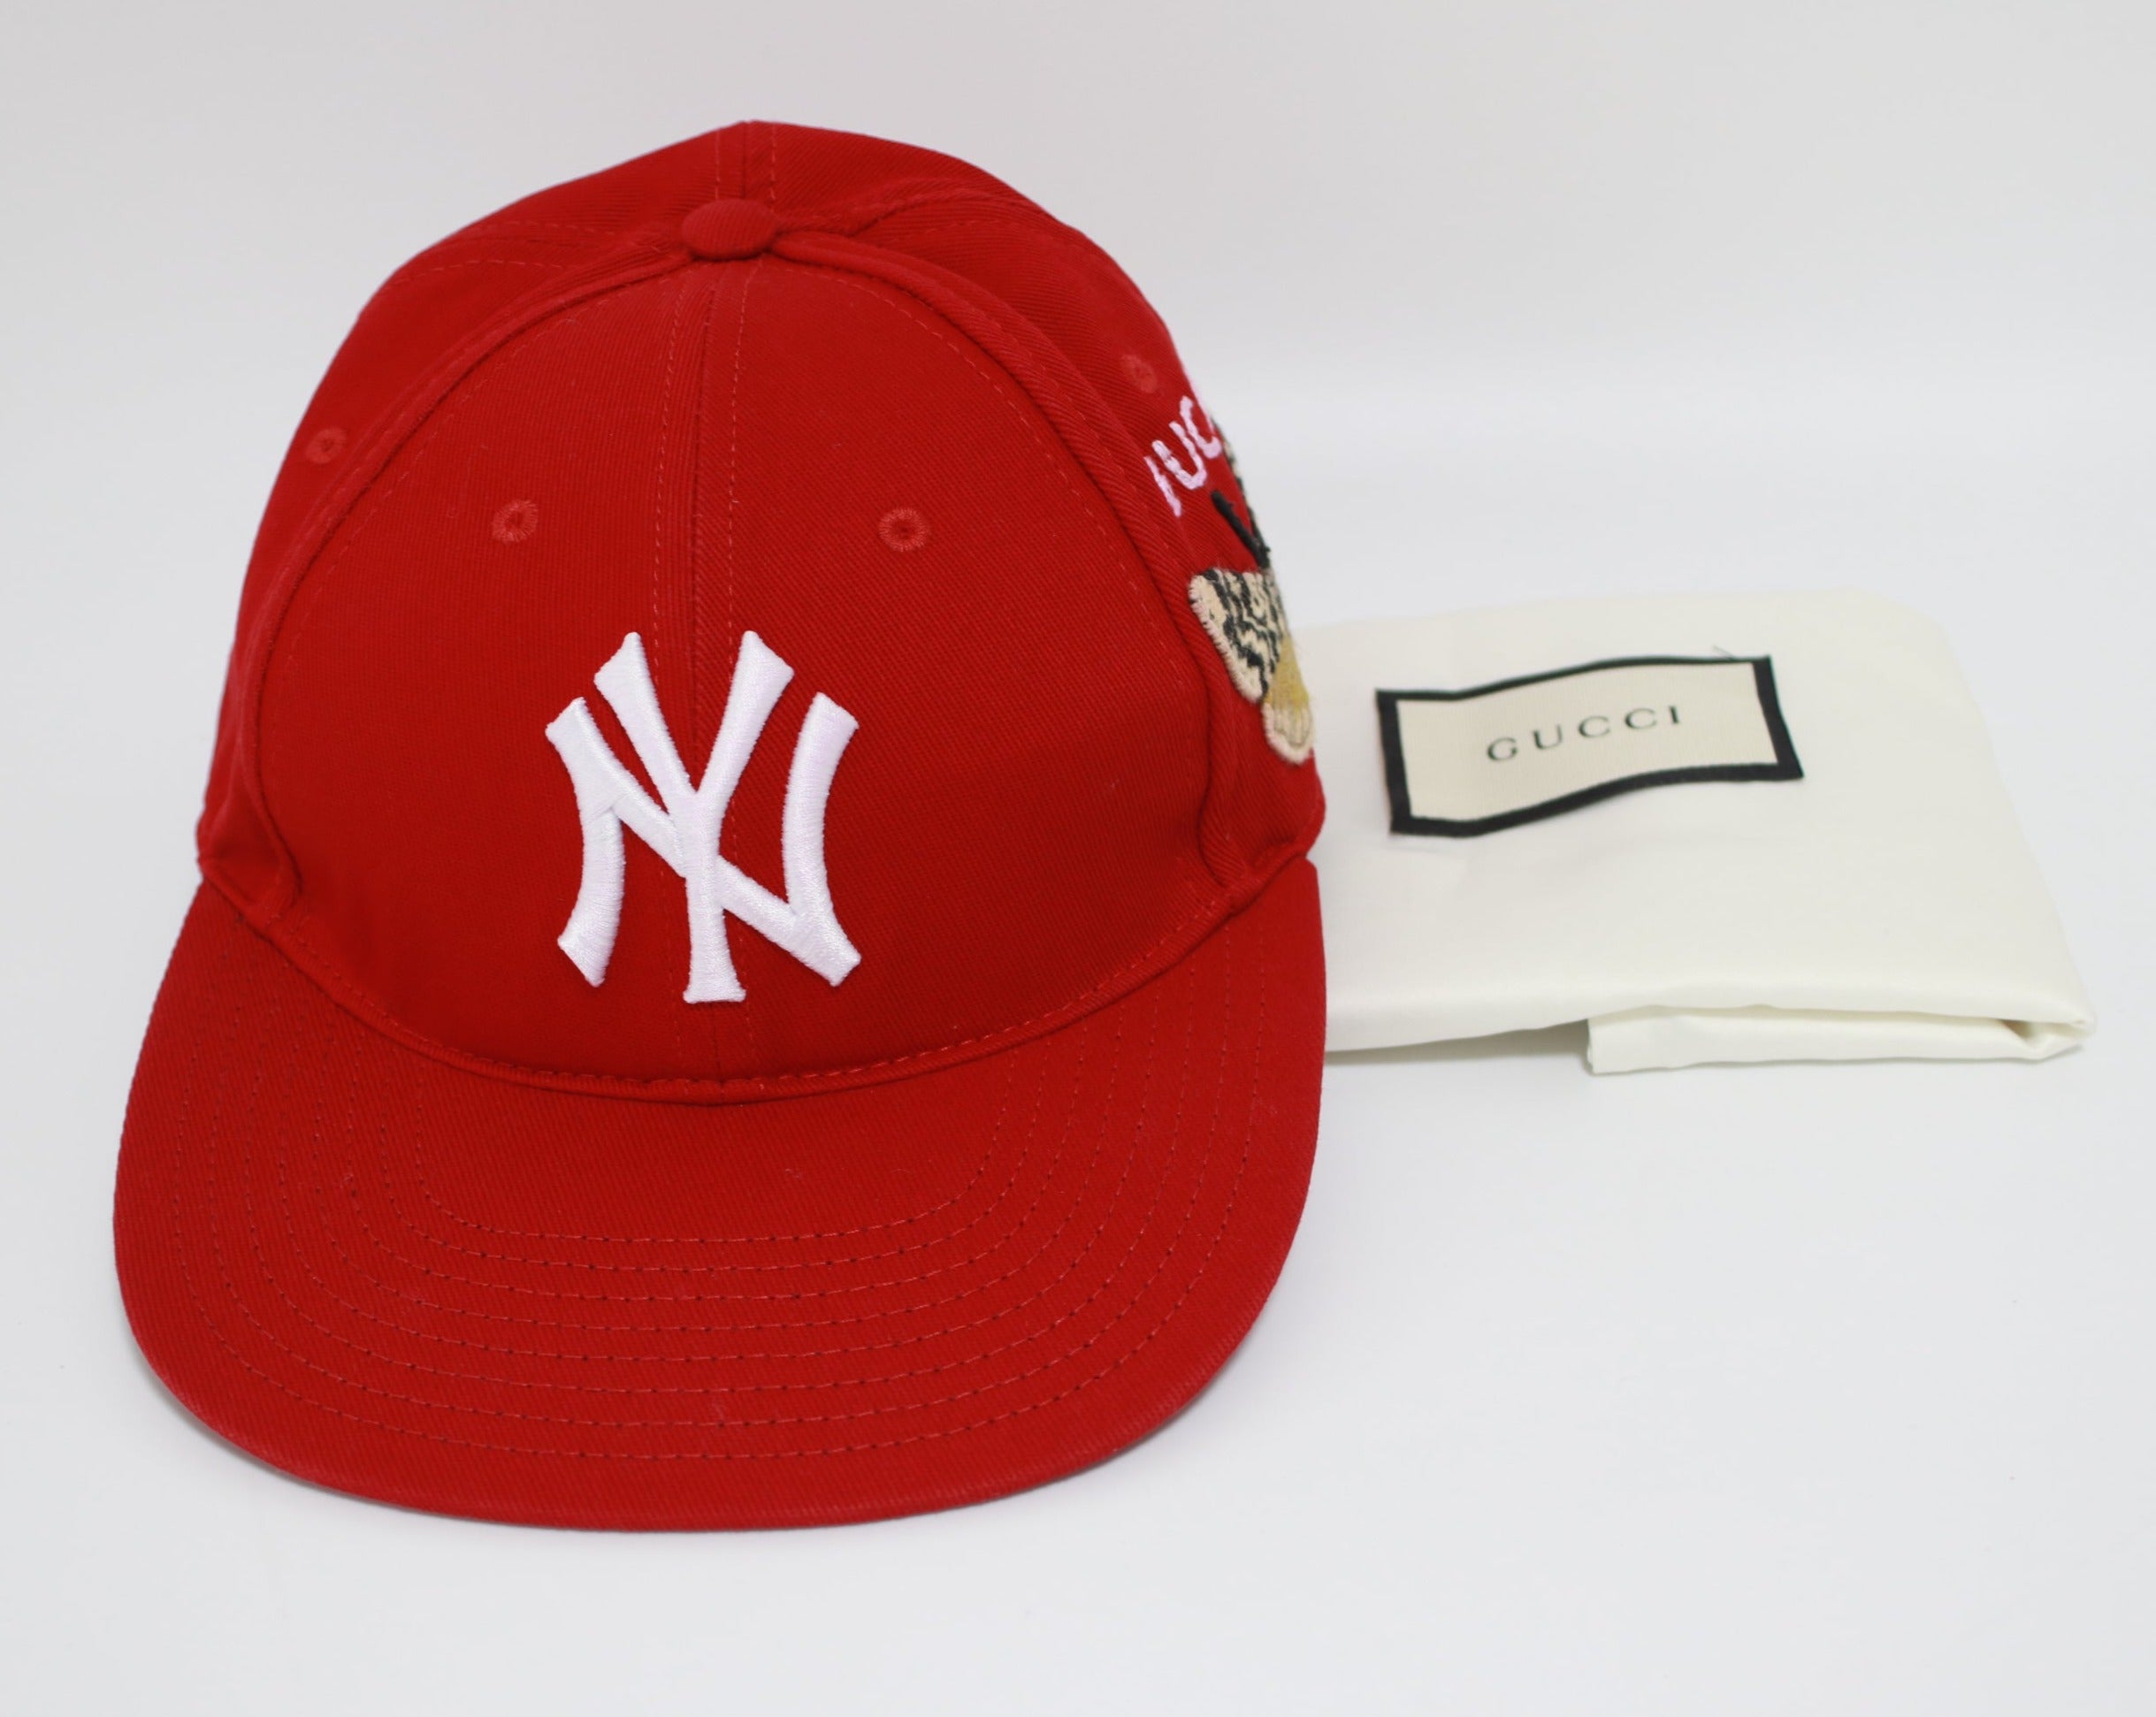 Gucci Baseball Cap Red Used (6998)